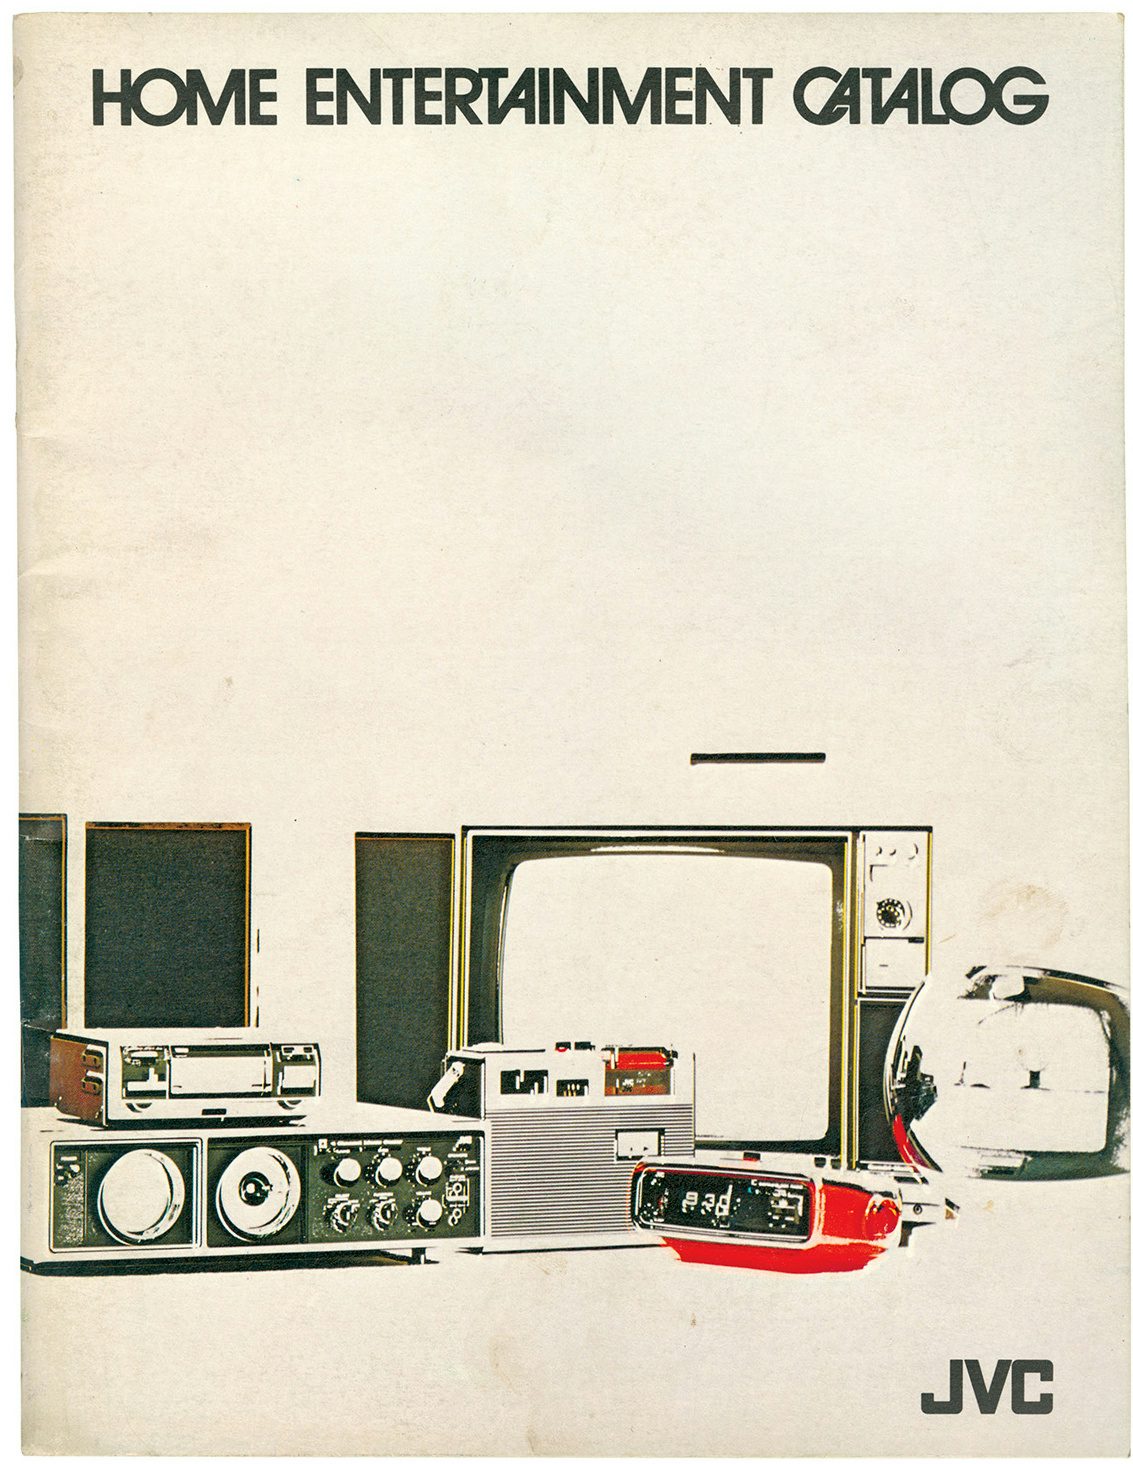 Catalogue front cover showing illustrations of hi-fi equipment surrounded by lots of blank space